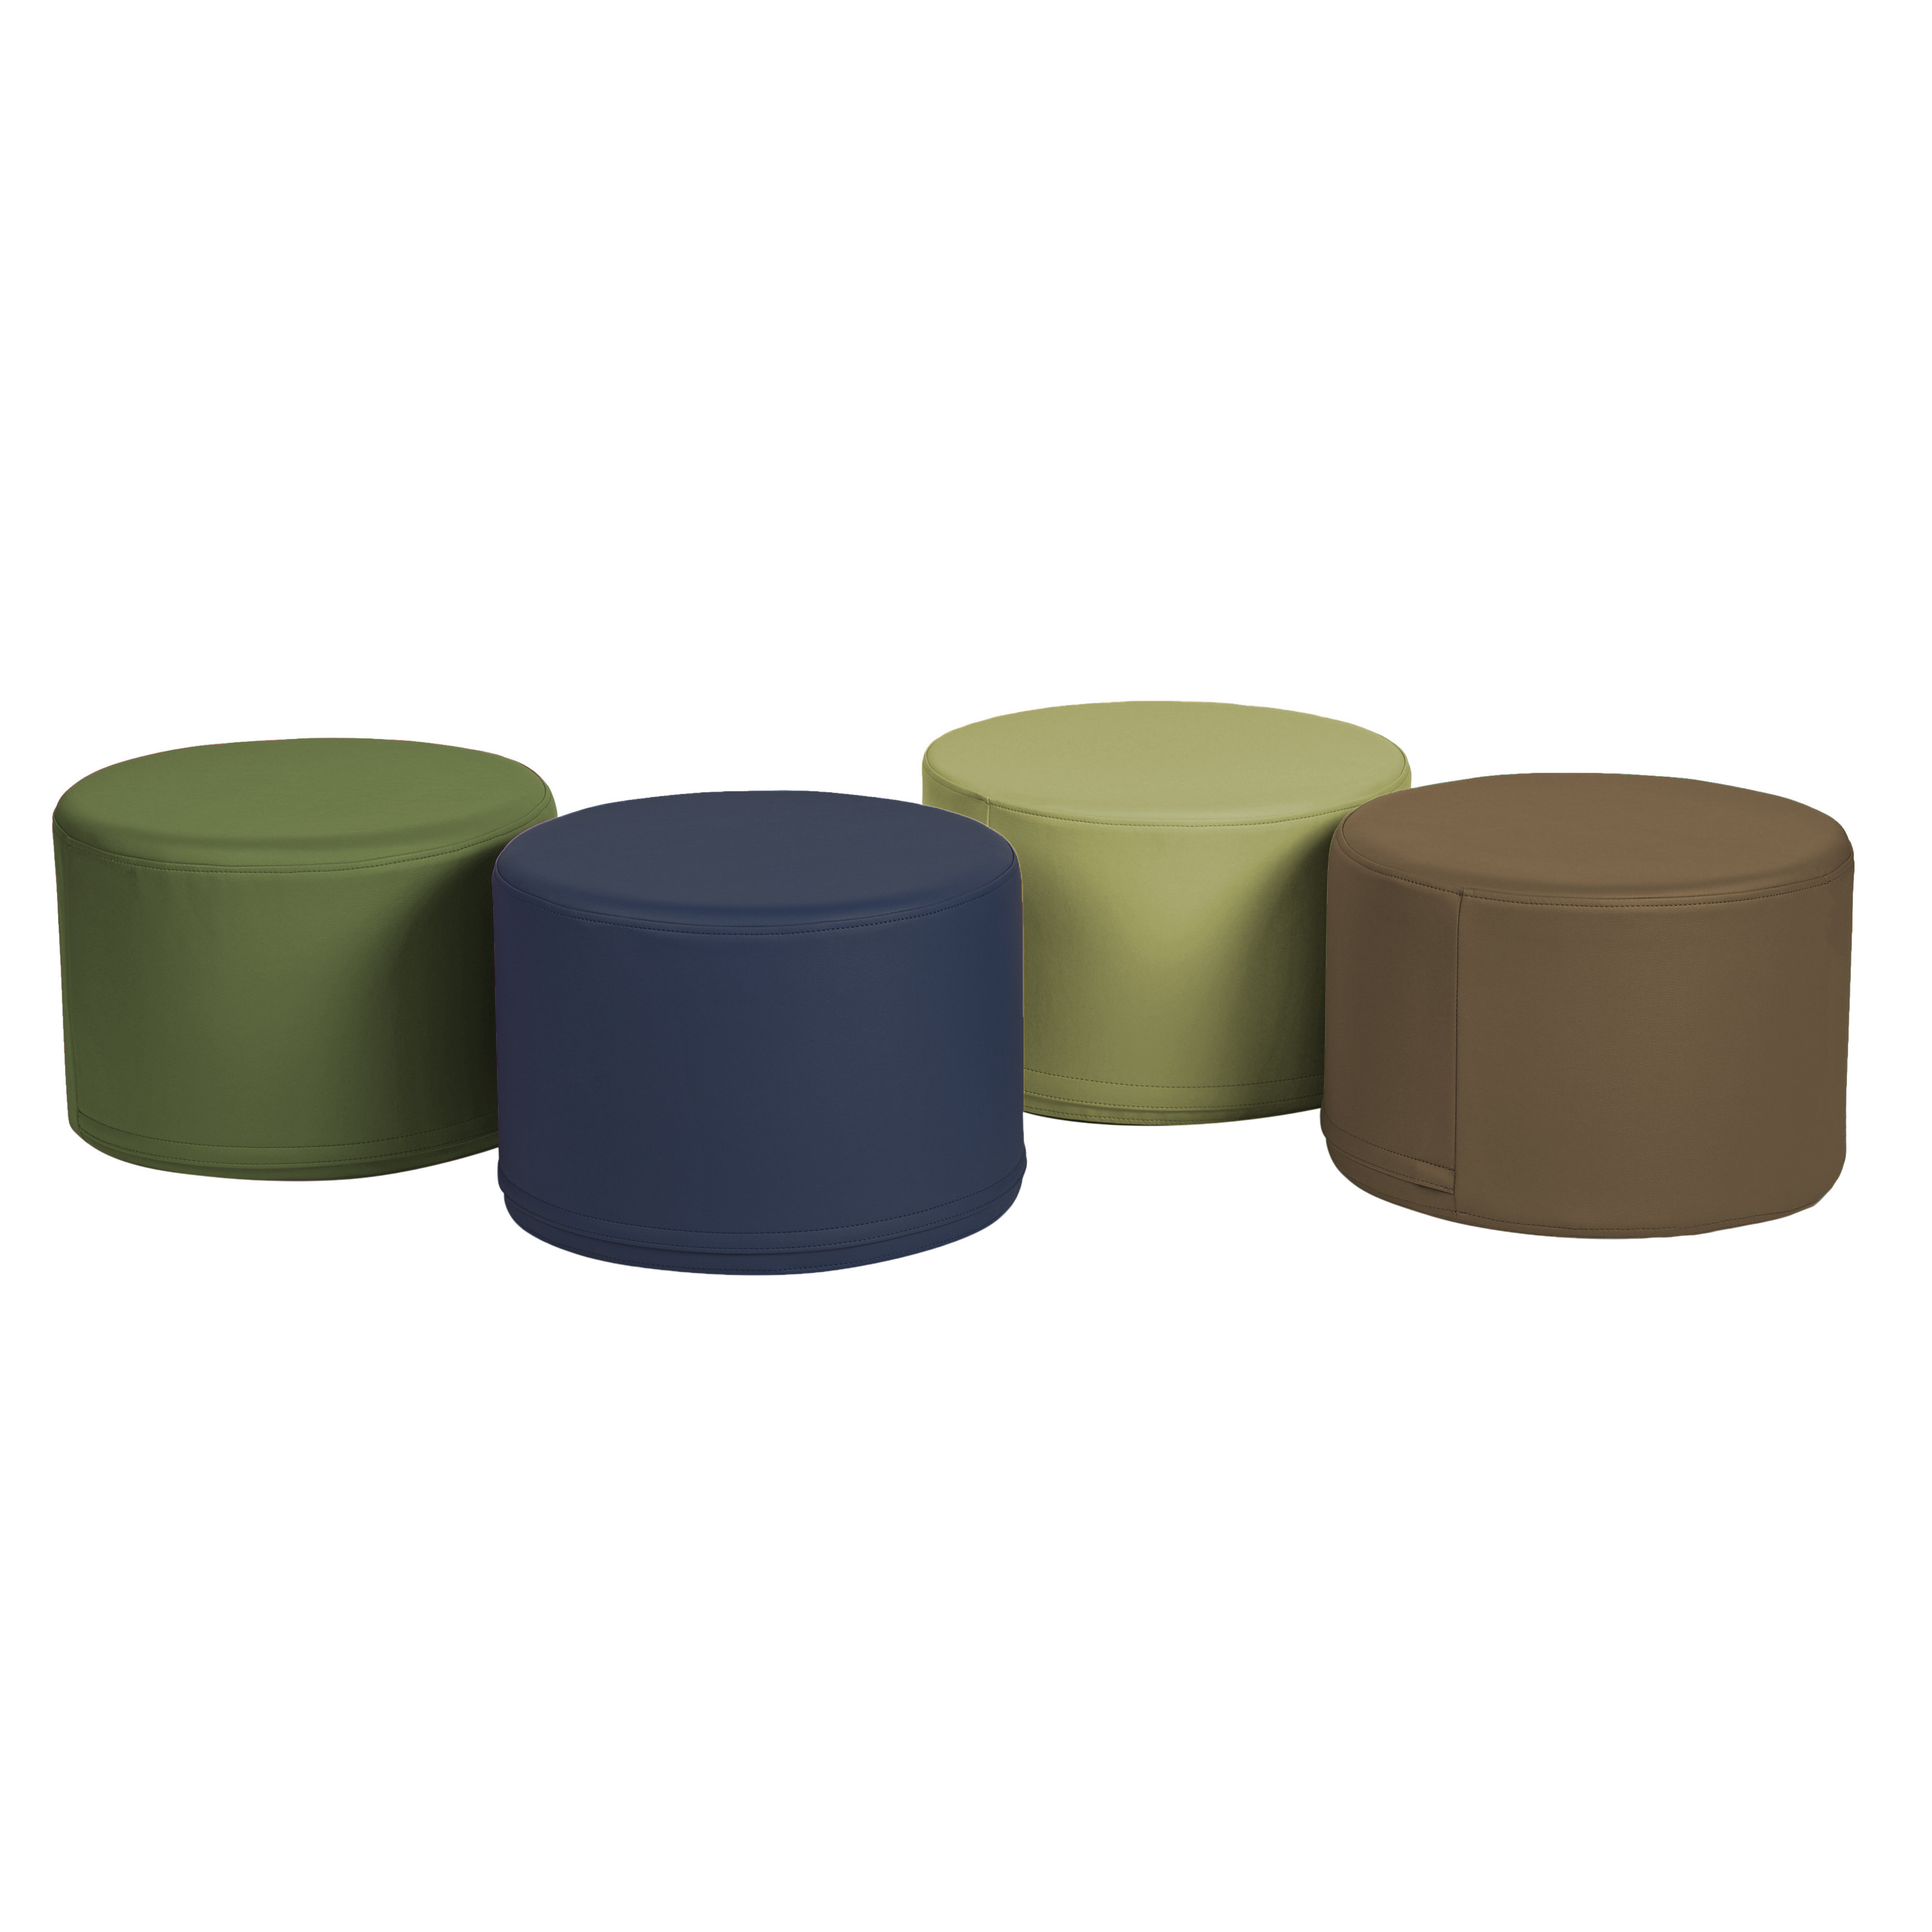 Acorn Soft Seating: 5 Benefits of Comfy Seats for School Children –  Willowbrook Education